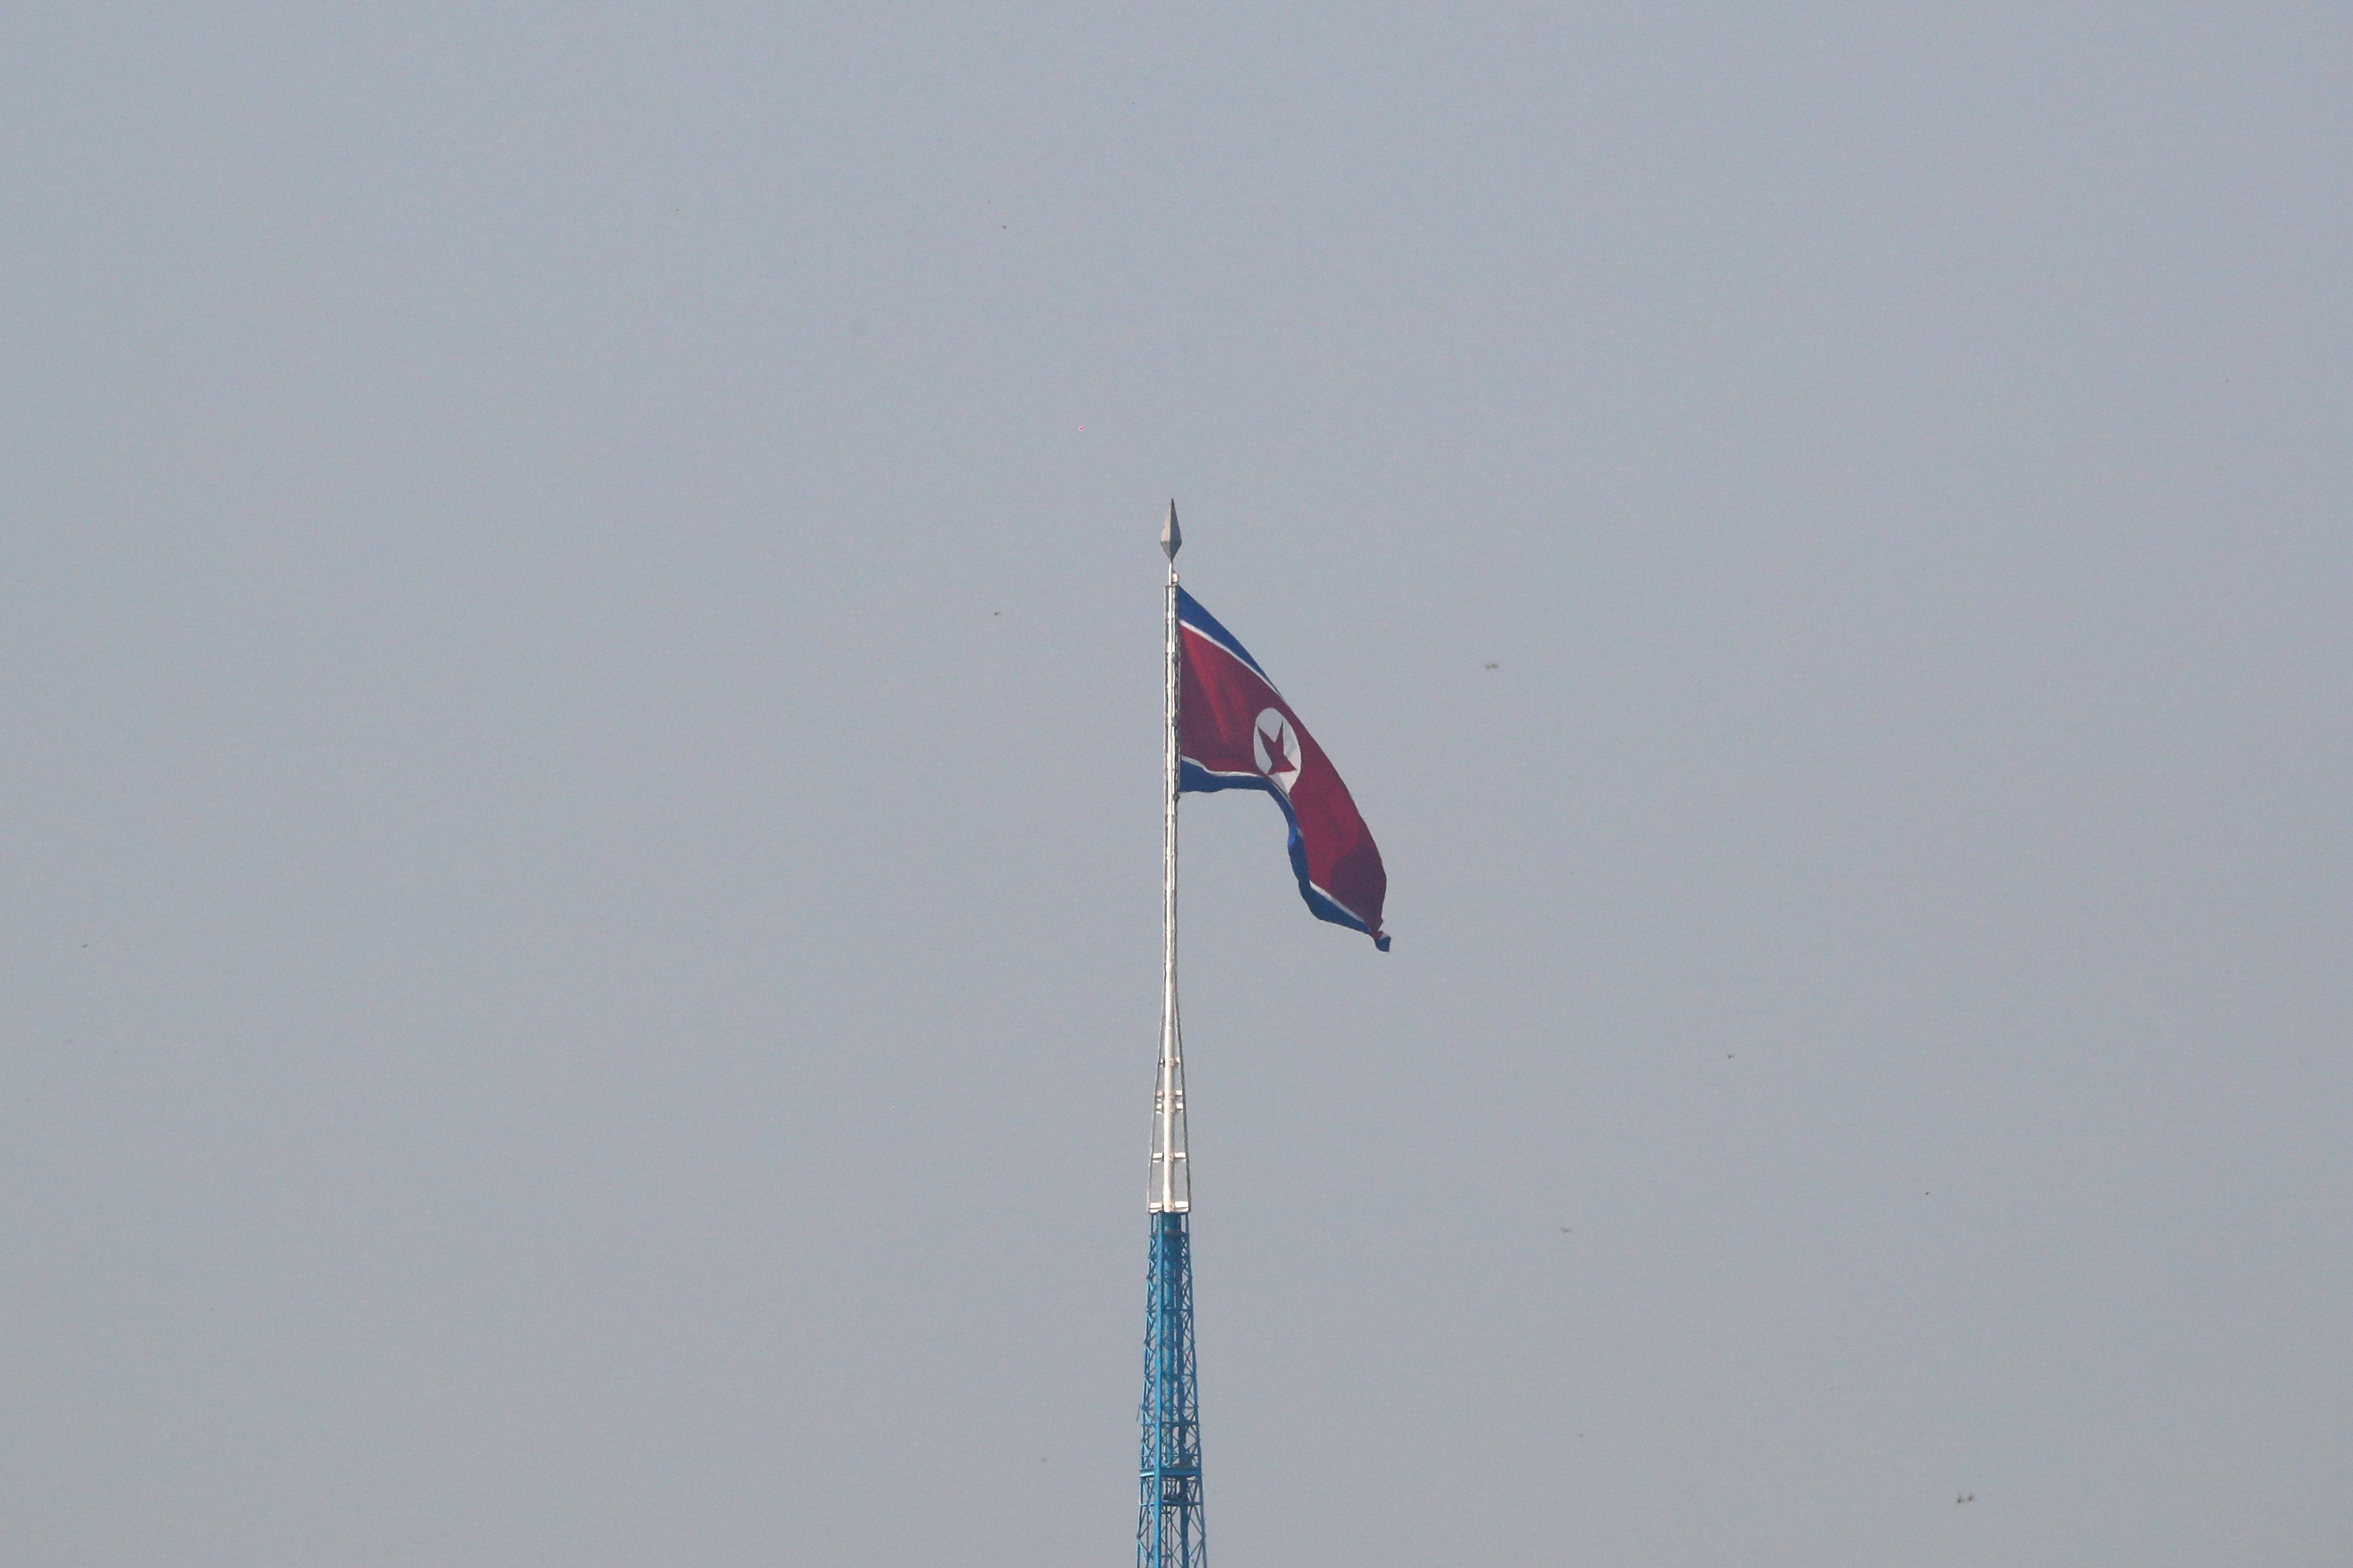 A North Korean flag flutters on top of the 160-metre tall tower at North Korea's propaganda village of Gijungdong, in this picture taken from Tae Sung freedom village near the Military Demarcation Line (MDL), inside the demilitarised zone separating the two Koreas, in Paju, South Korea, September 30, 2019. Photo: Reuters